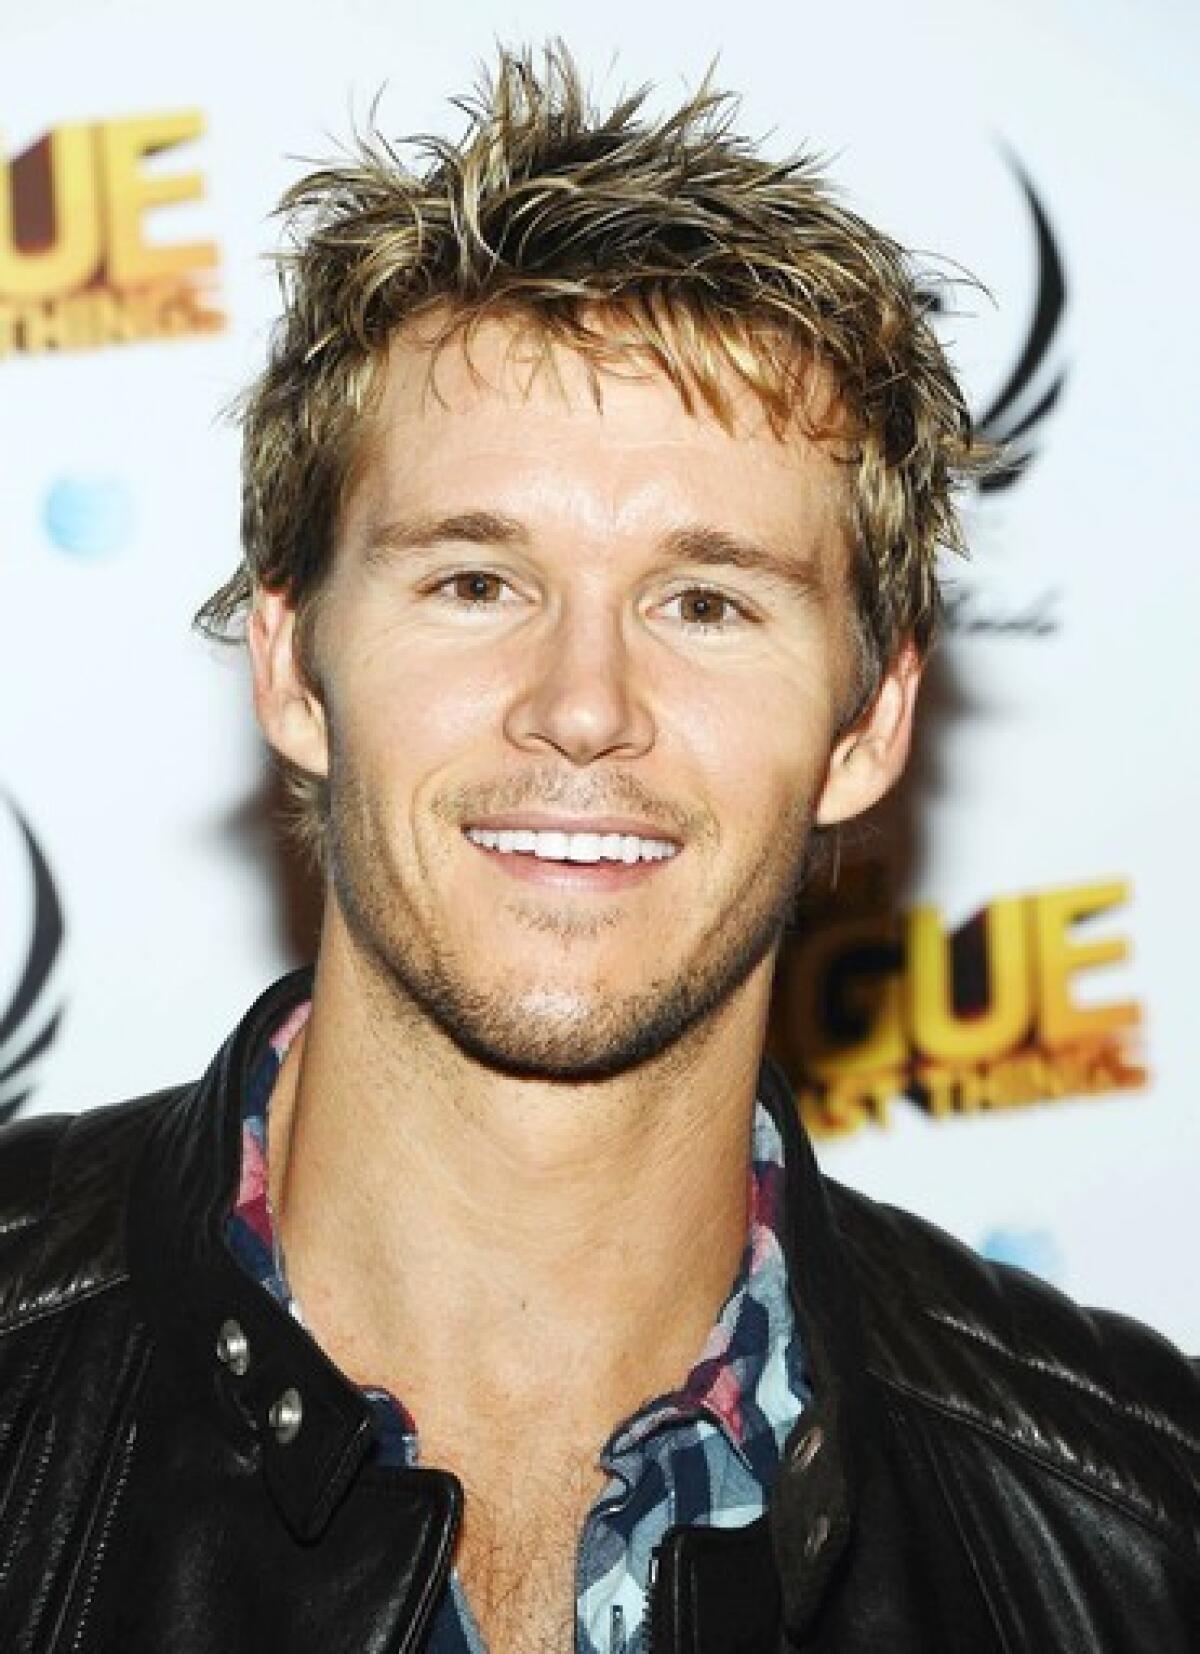 Some men are asking for hair highlights like those of "True Blood's" Ryan Kwanten.